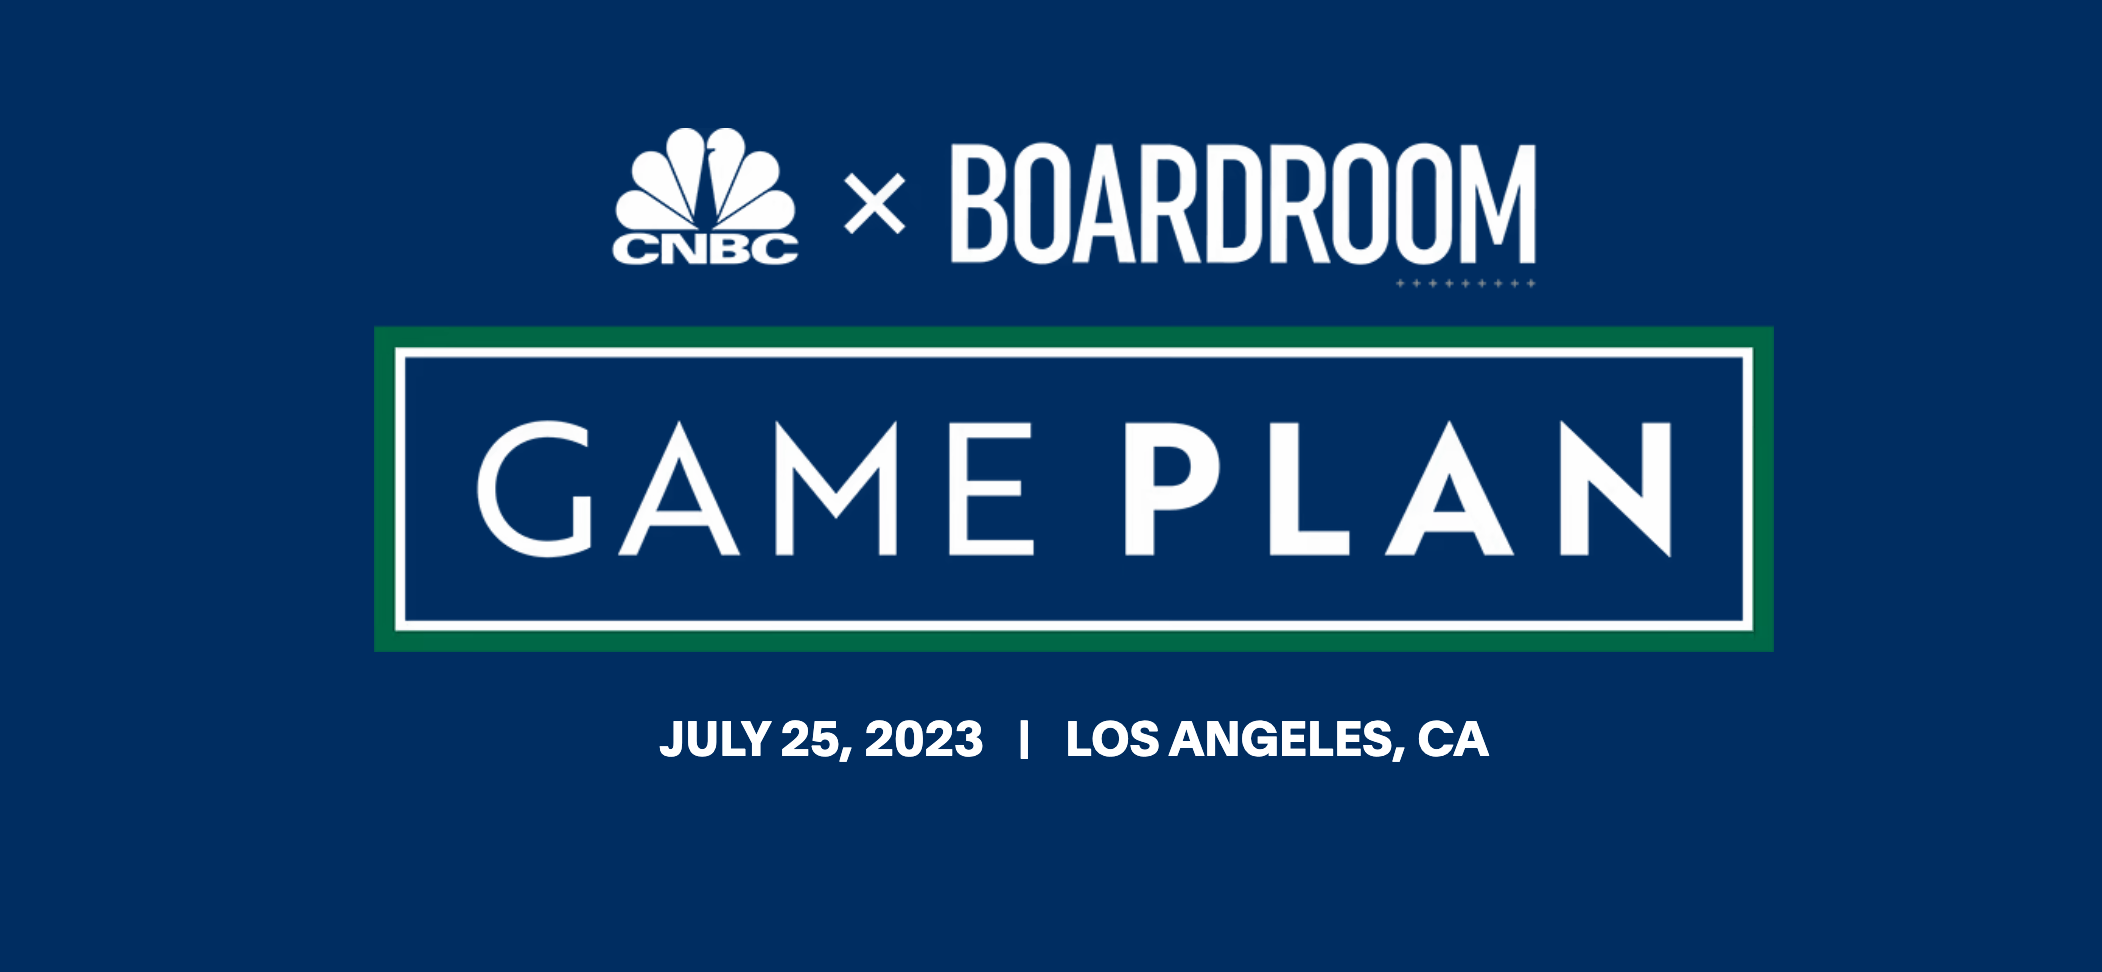 Game Plan event poster presented by CNBC and Boardroom